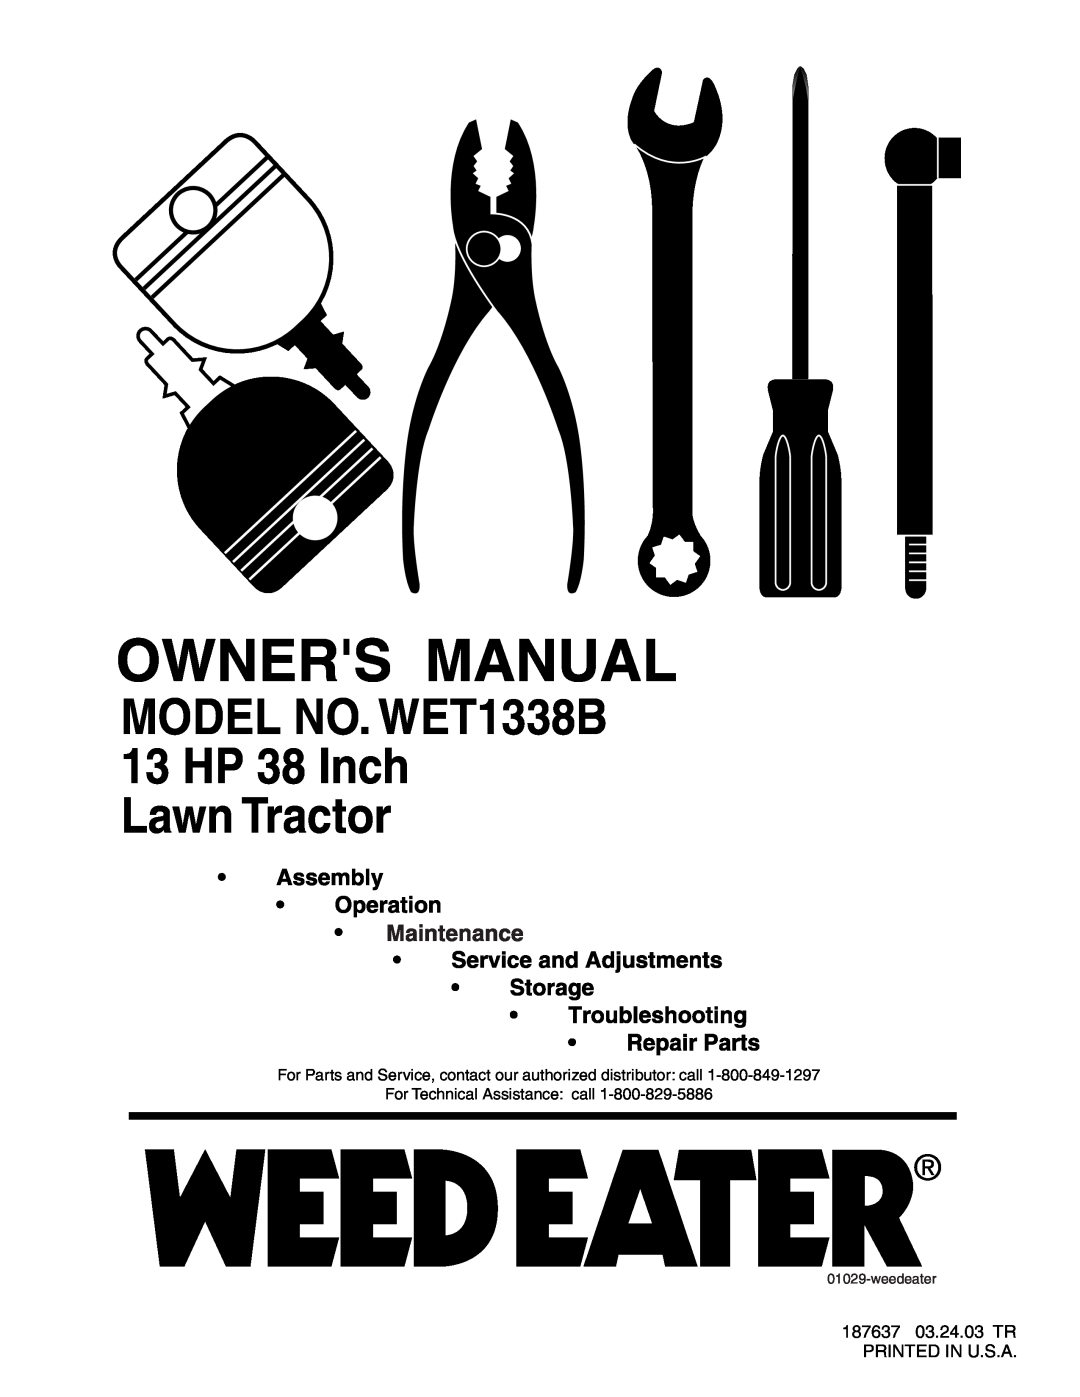 Weed Eater 187637 manual MODEL NO. WET1338B 13 HP 38 Inch Lawn Tractor 